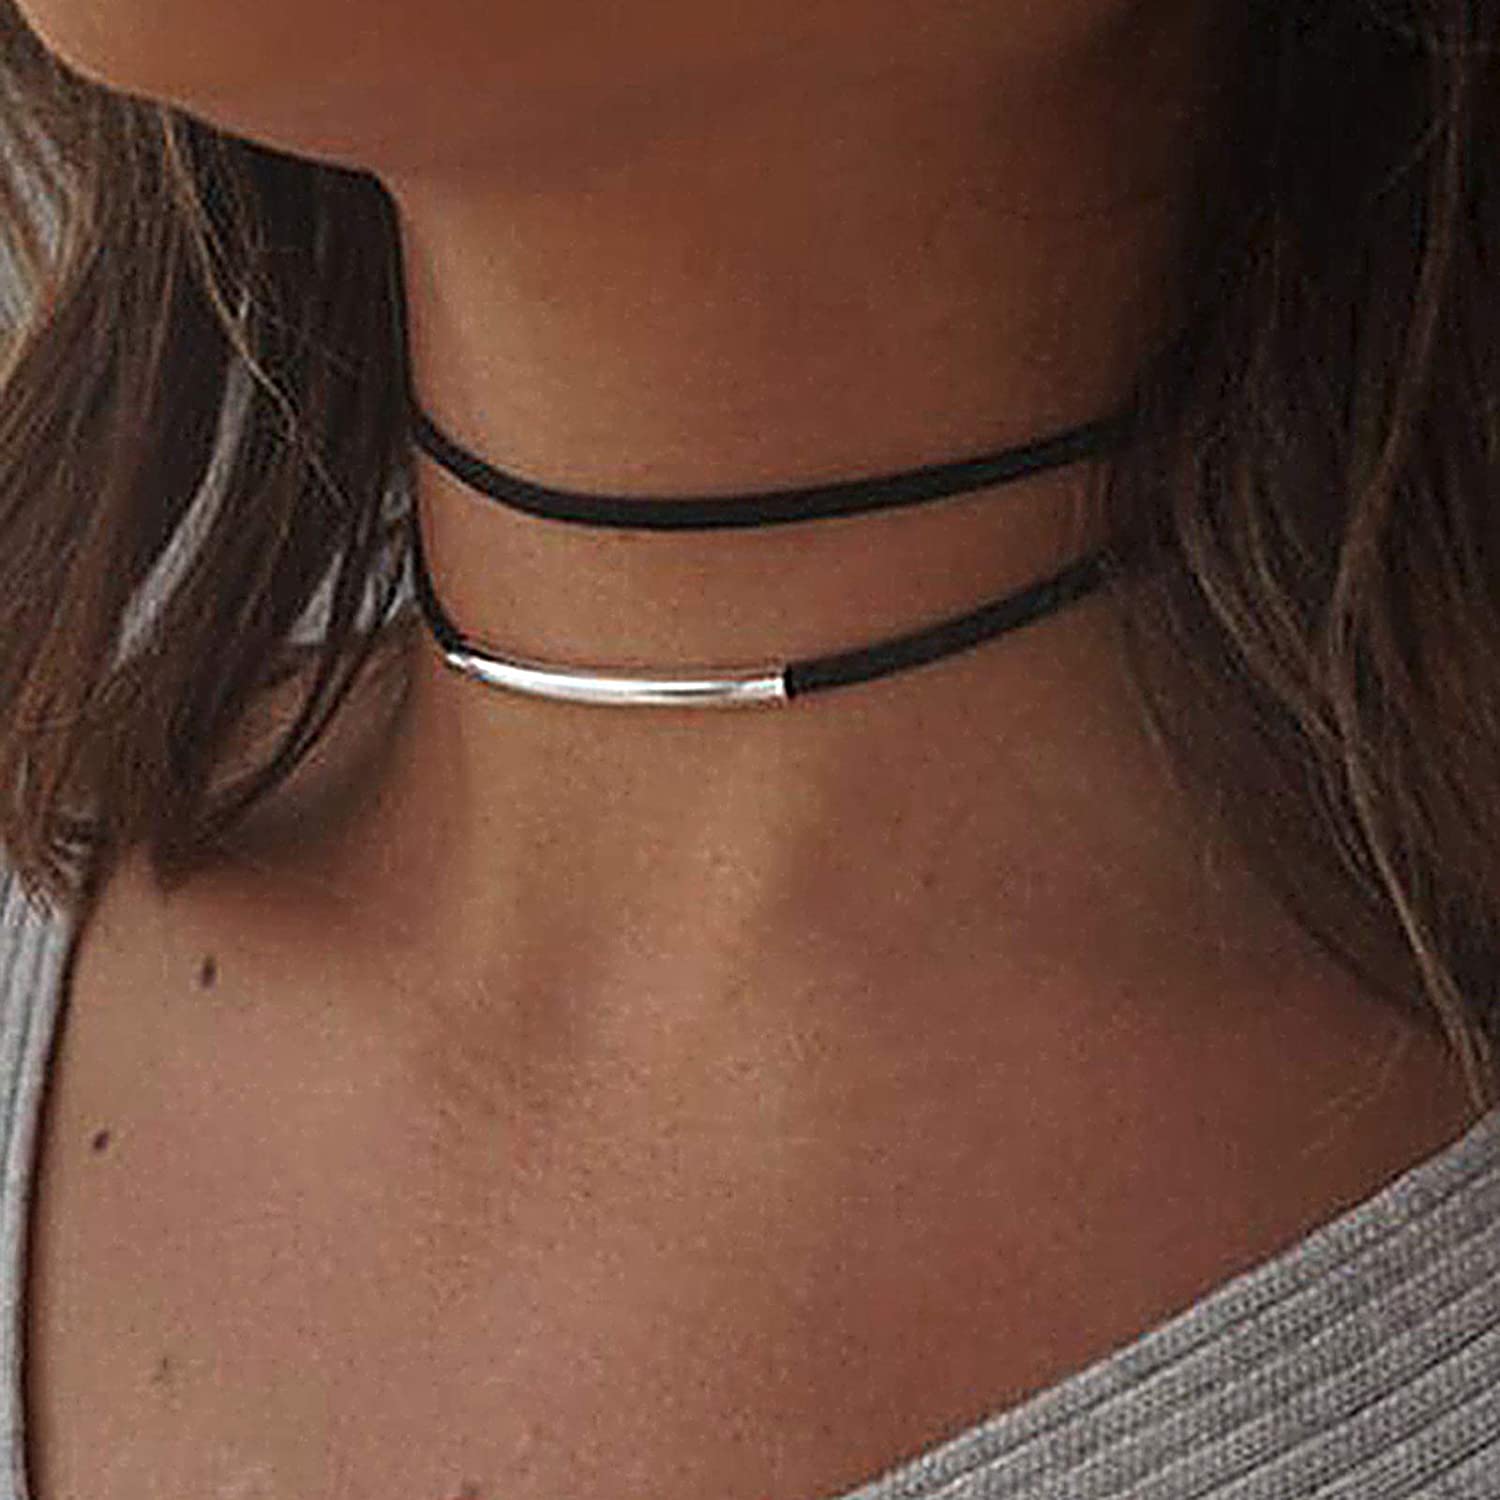 Jakawin Choker Necklace Adjustable Black Collar Necklaces for Women and Girls NK134